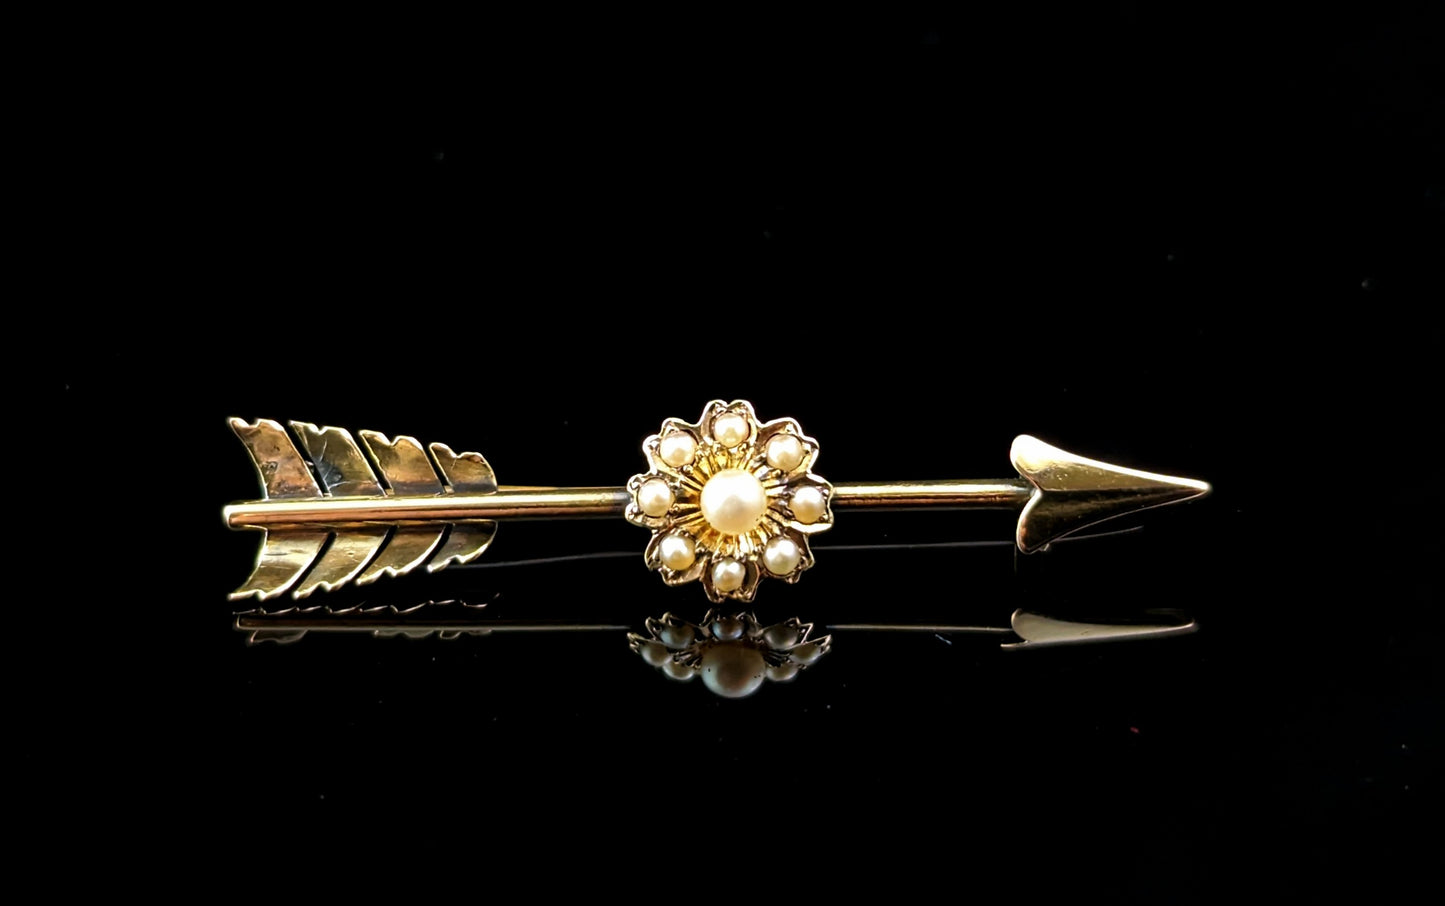 Antique Arrow and flower brooch, Pearl and 9ct gold